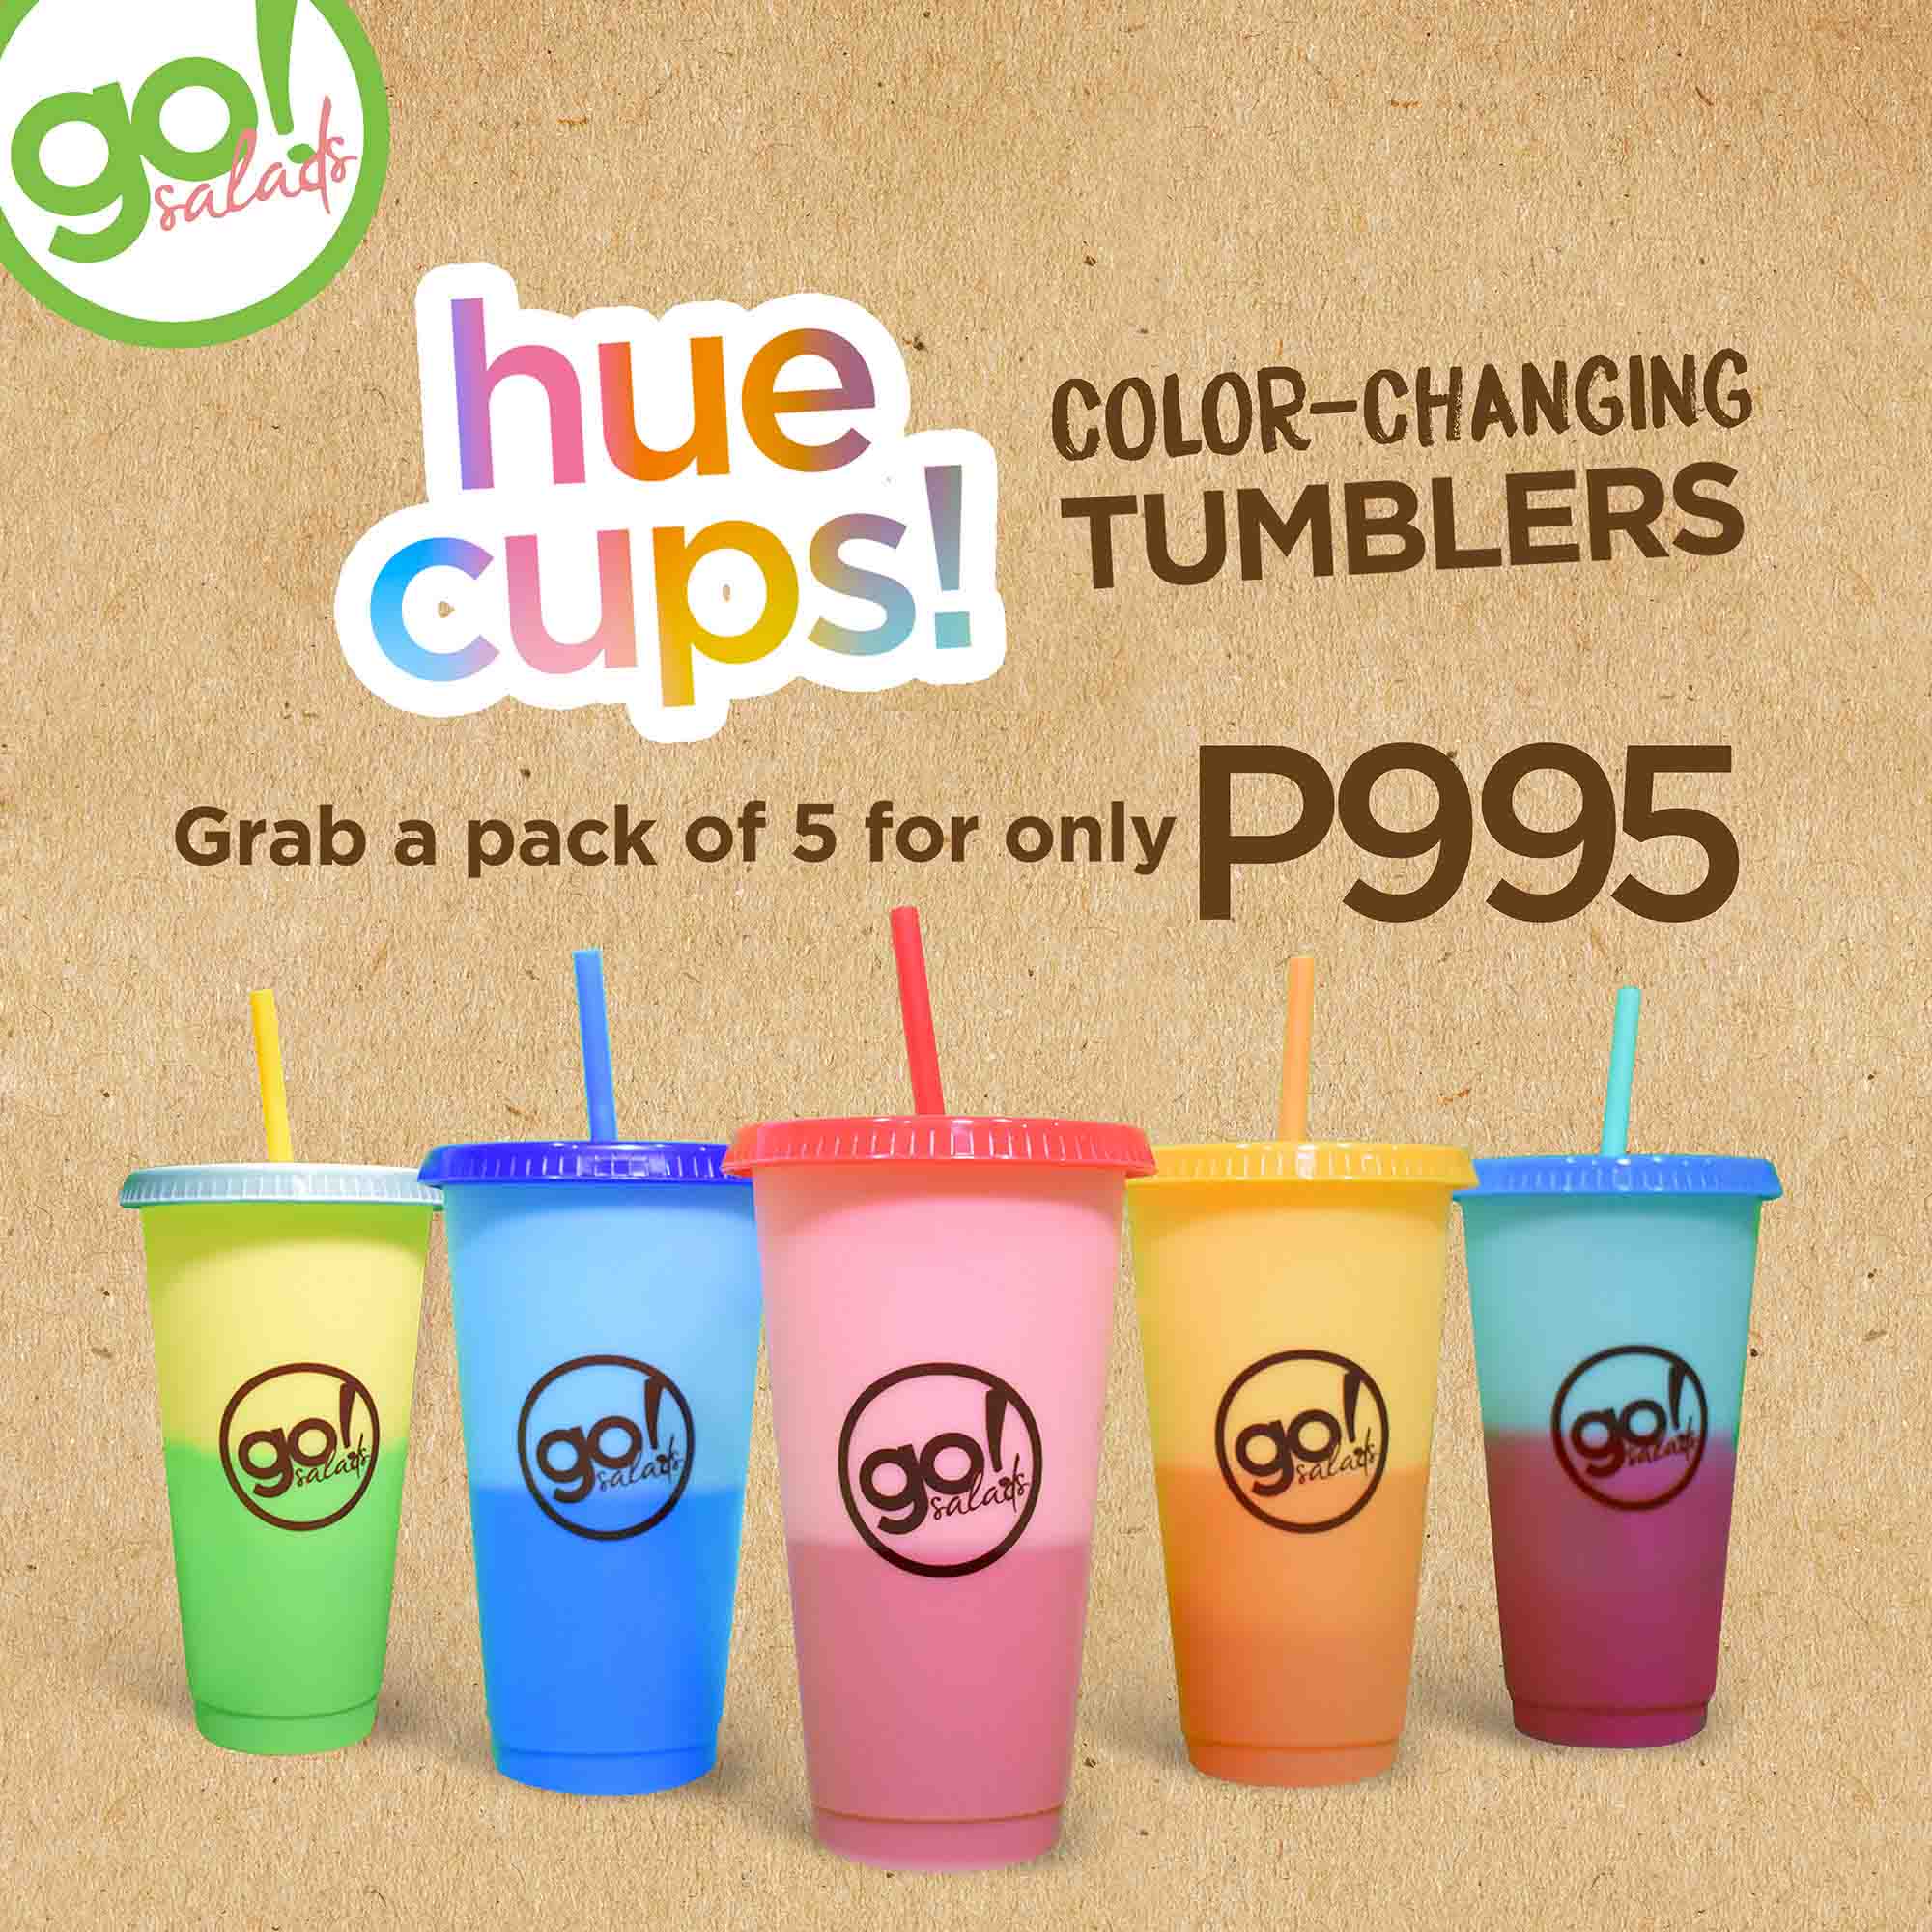 Color-Changing Tumblers from Go! Salads